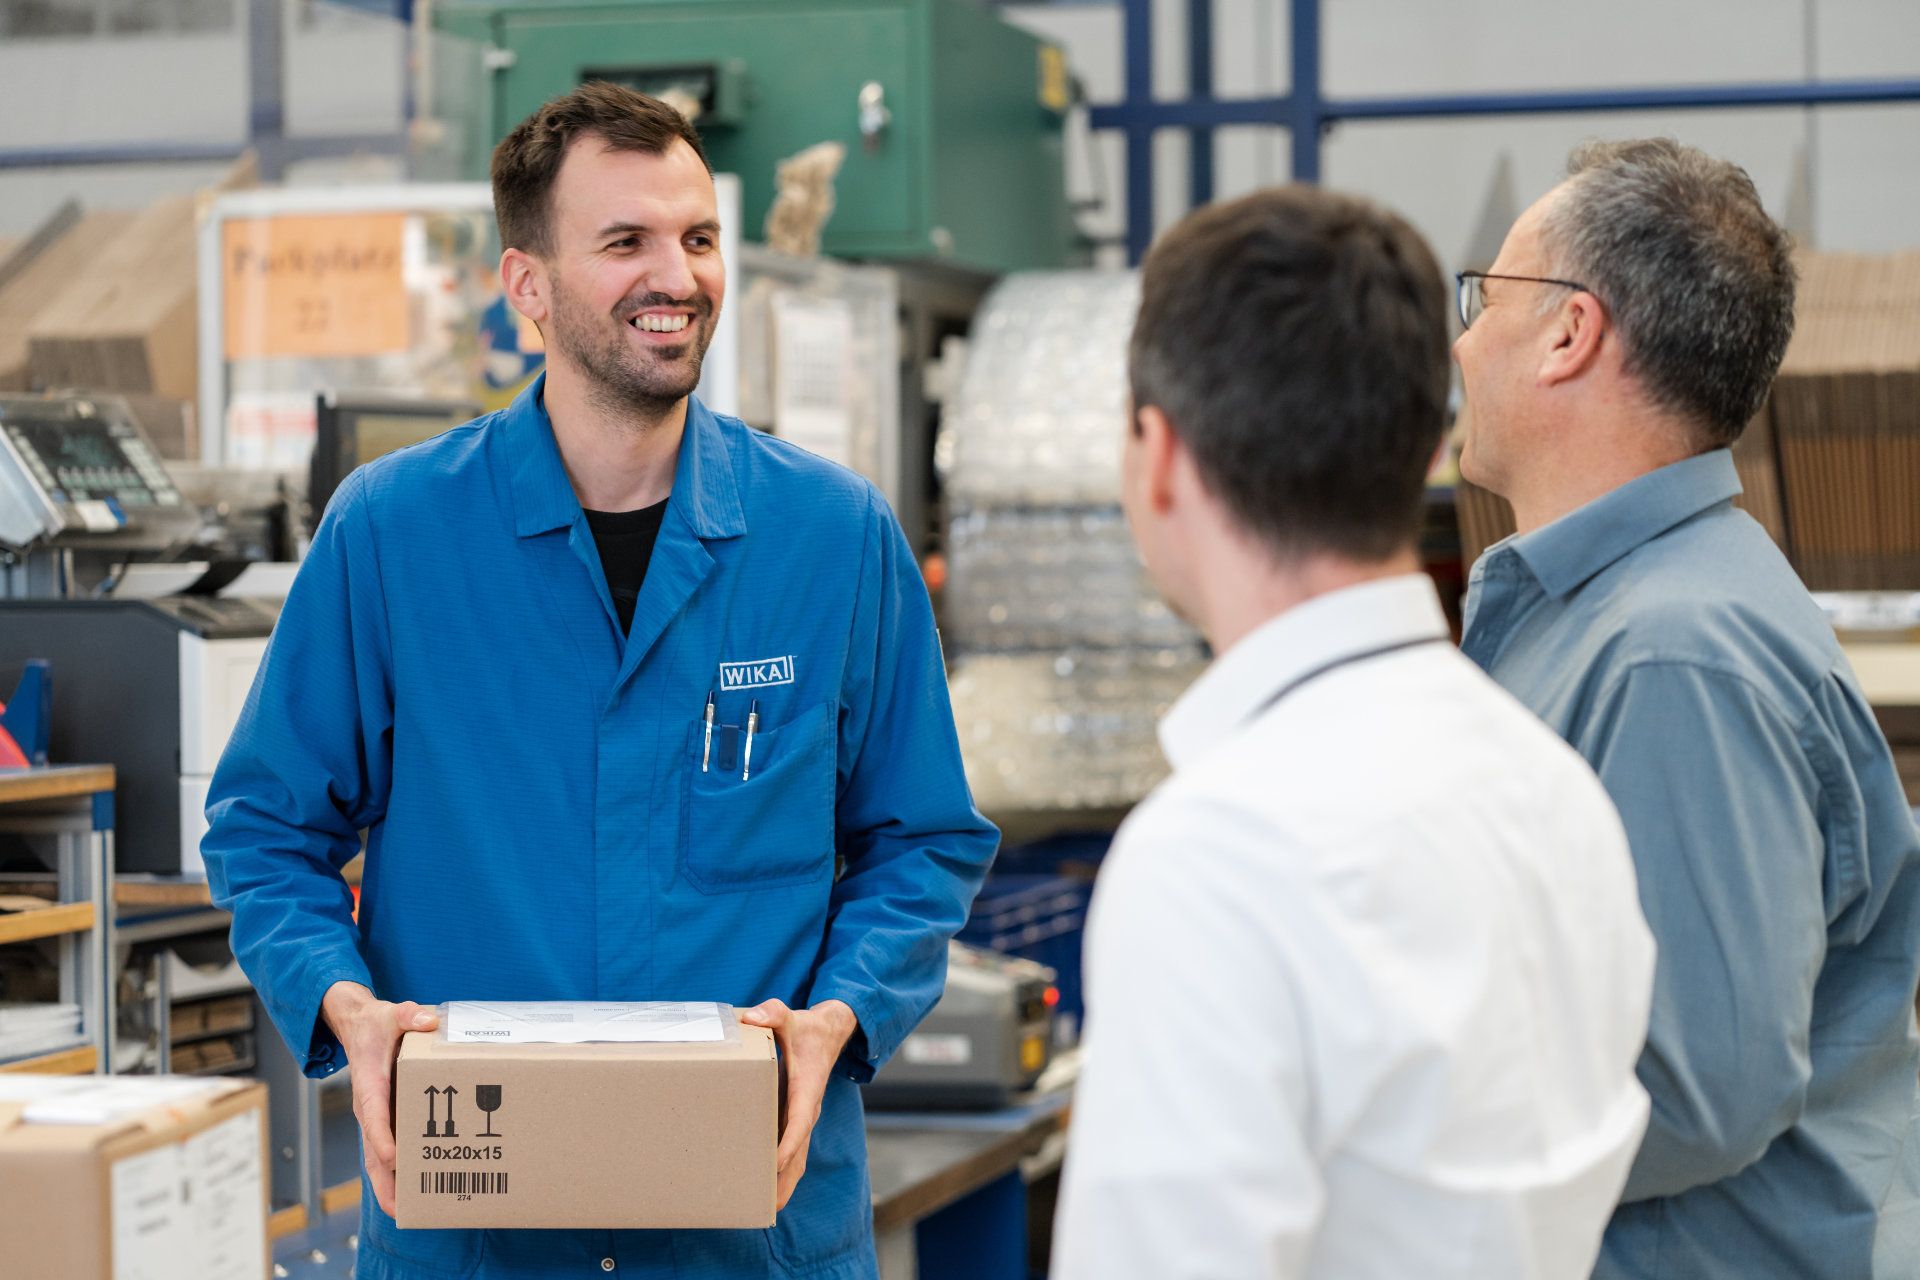 Three colleagues sharing a light-hearted moment in a warehouse, with one person in a blue work shirt holding a package and engaging in a conversation with the others.